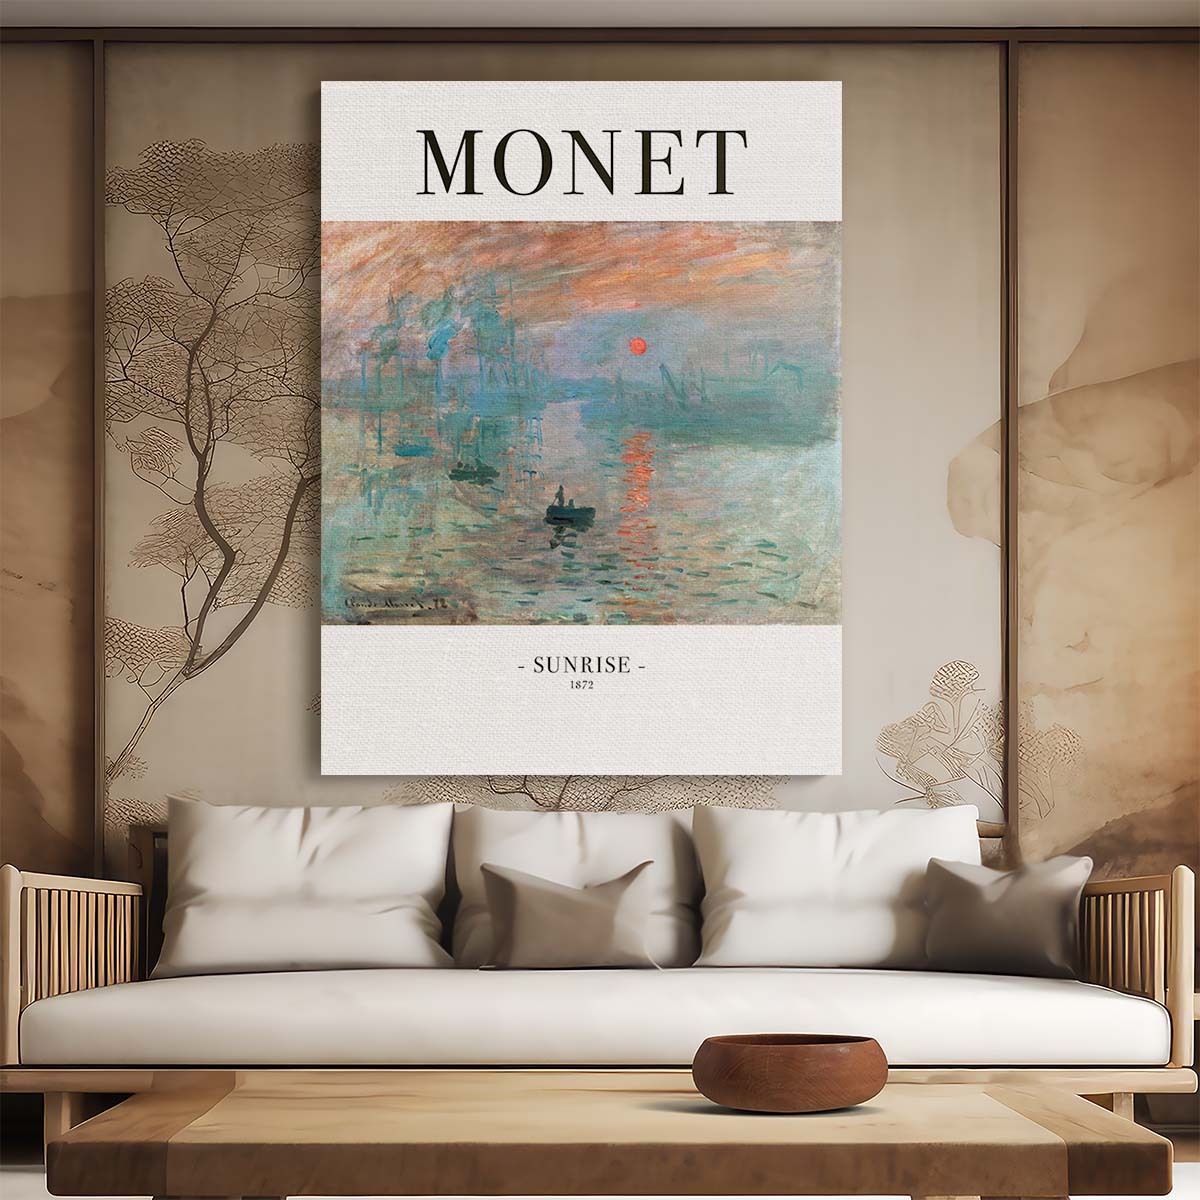 Monet's Sunrise 1872 Oil Paint Illustration, Abstract Boat Scene by Luxuriance Designs, made in USA